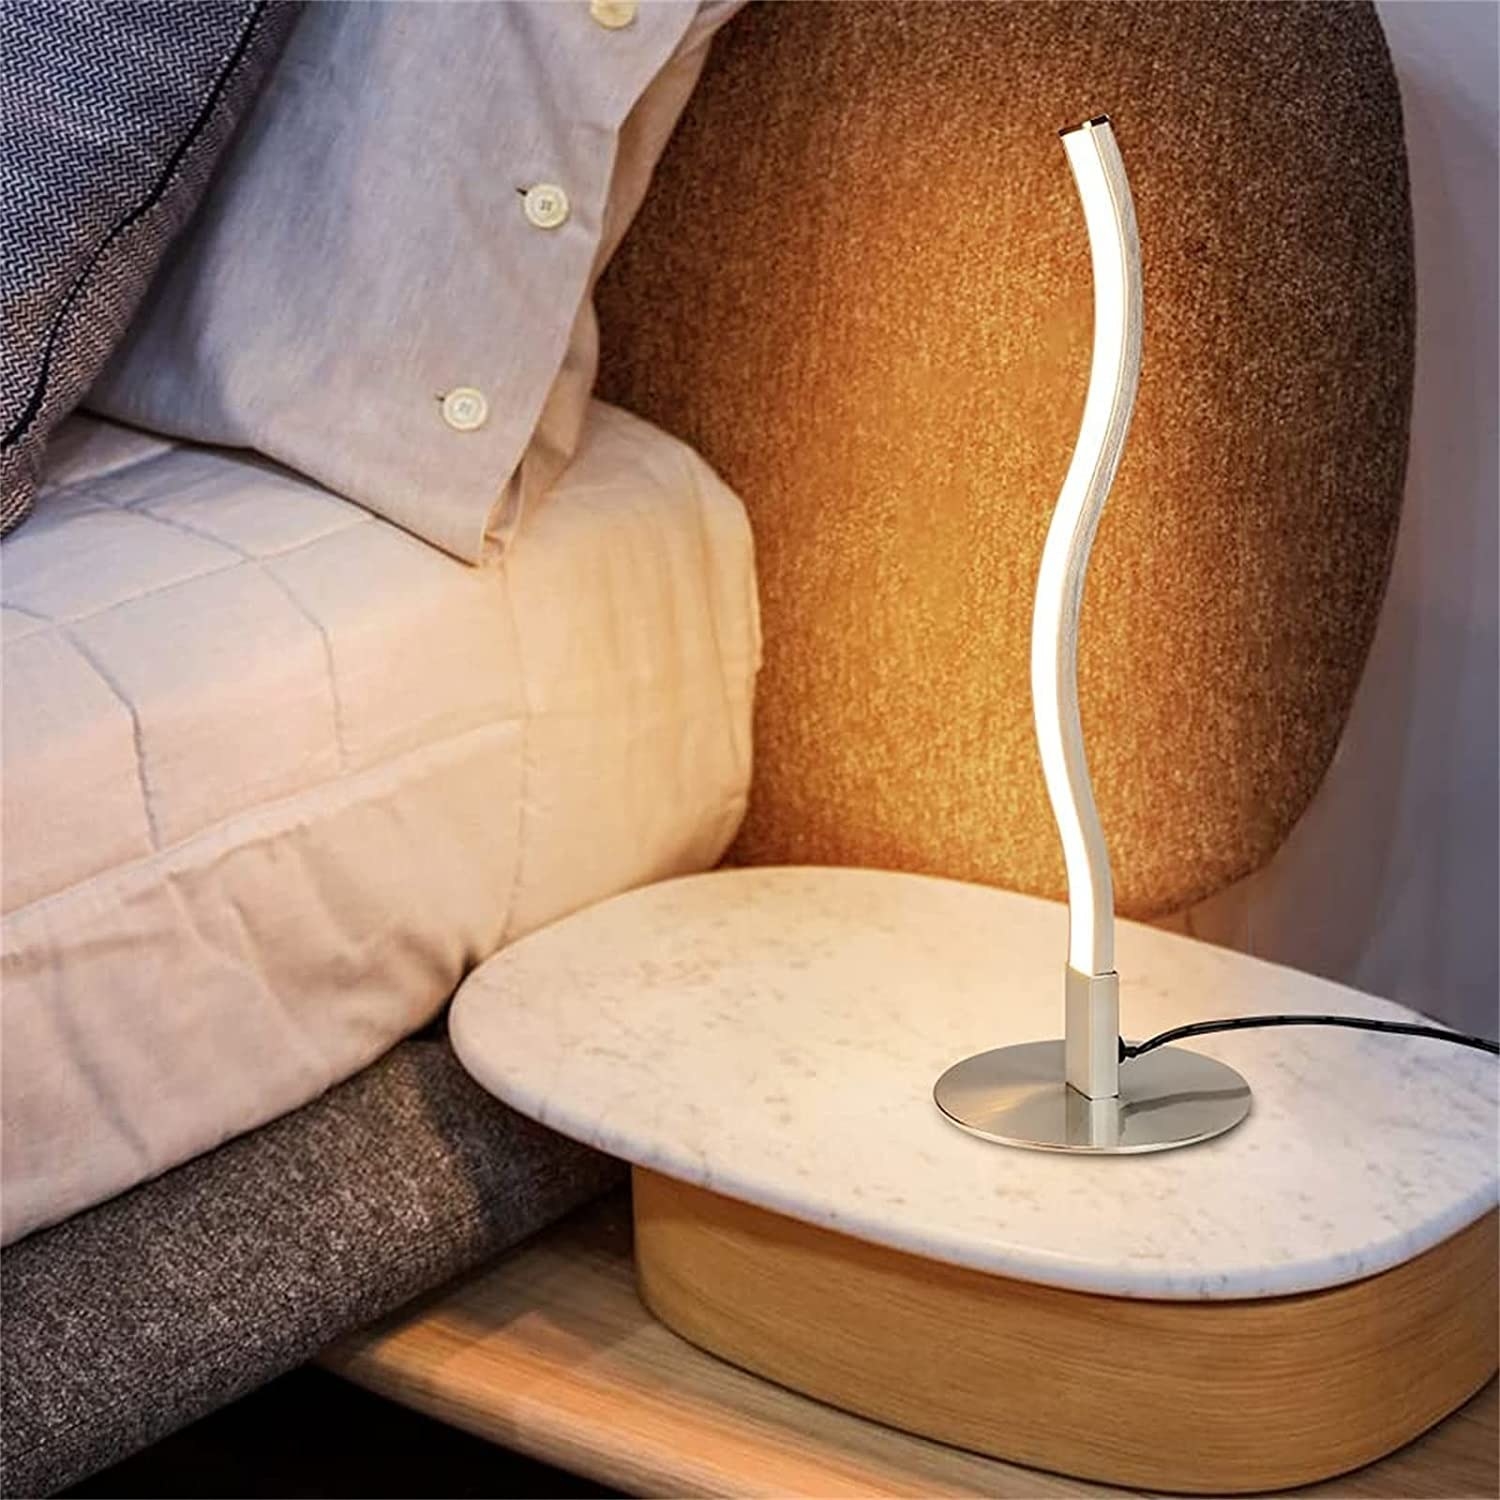 The light on a bedside table